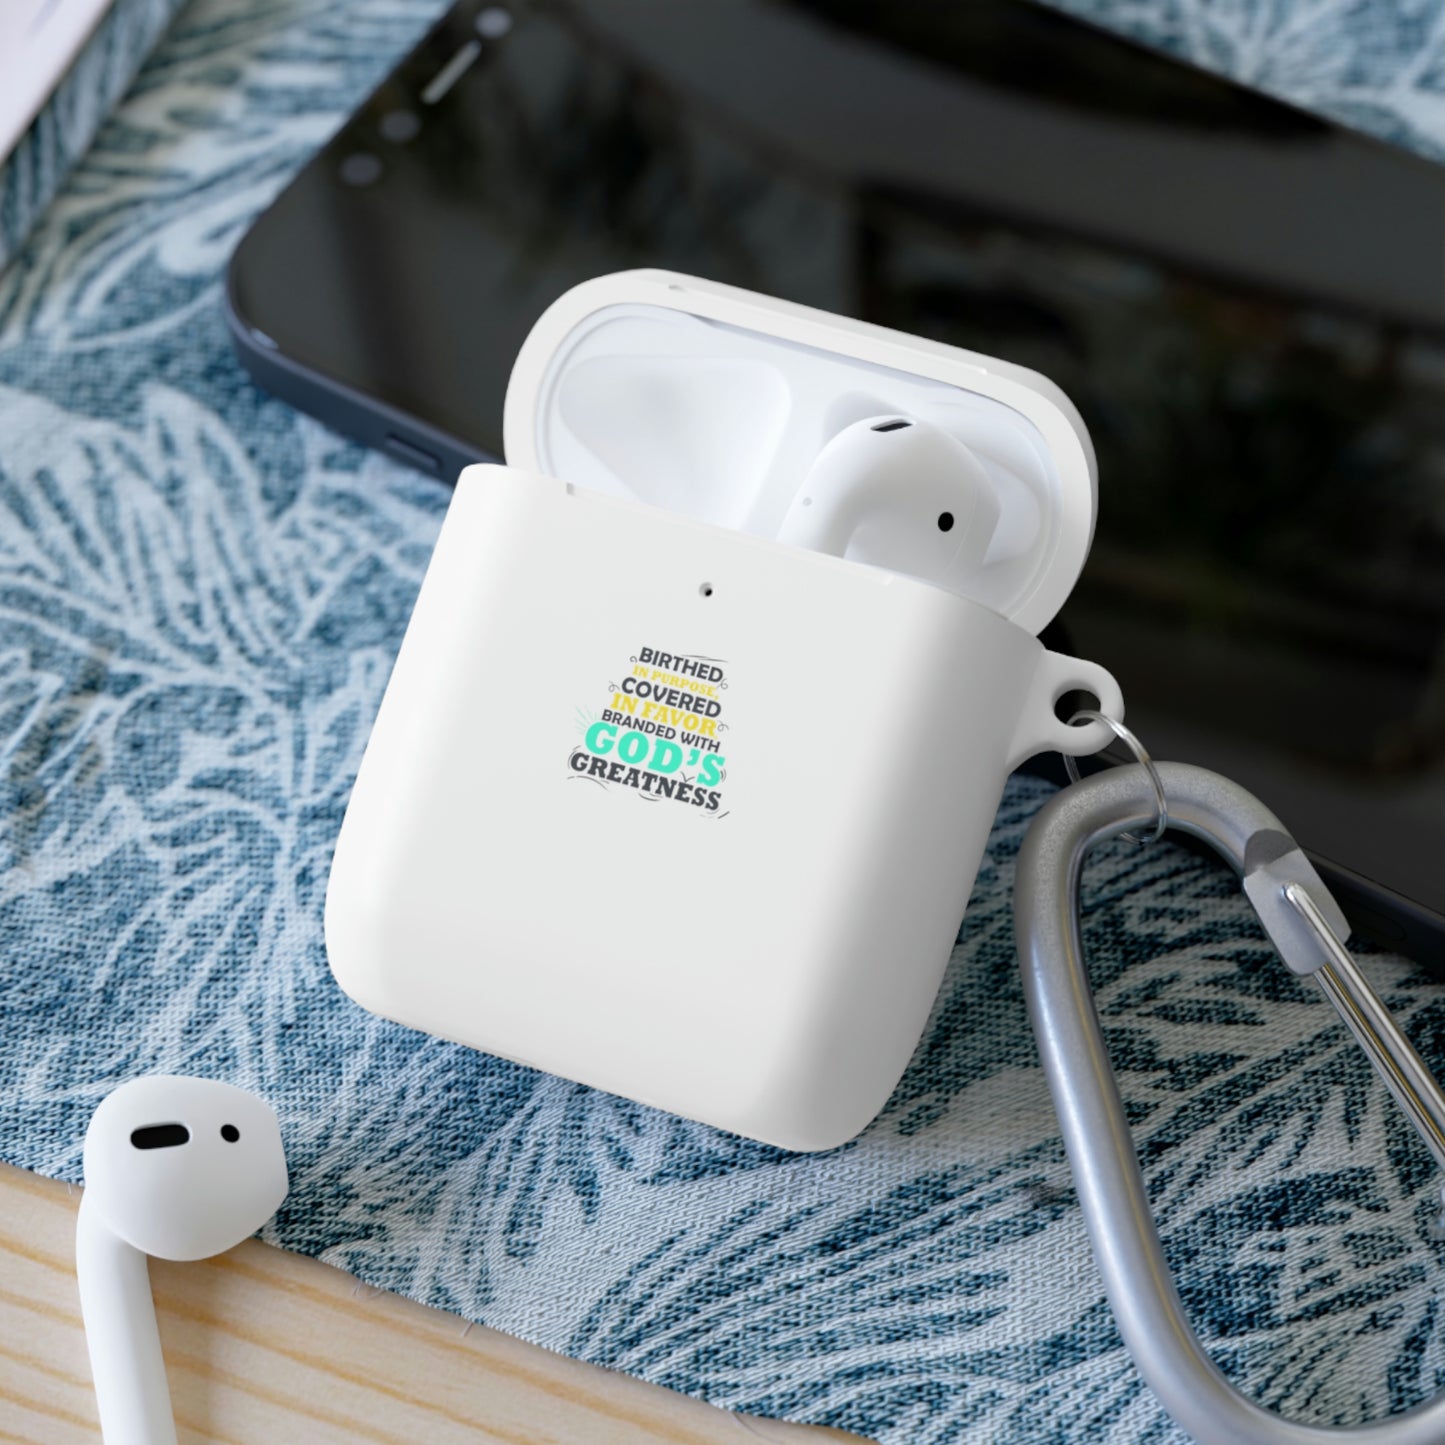 Birthed In Purpose, Covered In Favor, Branded With God's Greatness AirPods / Airpods Pro Case cover